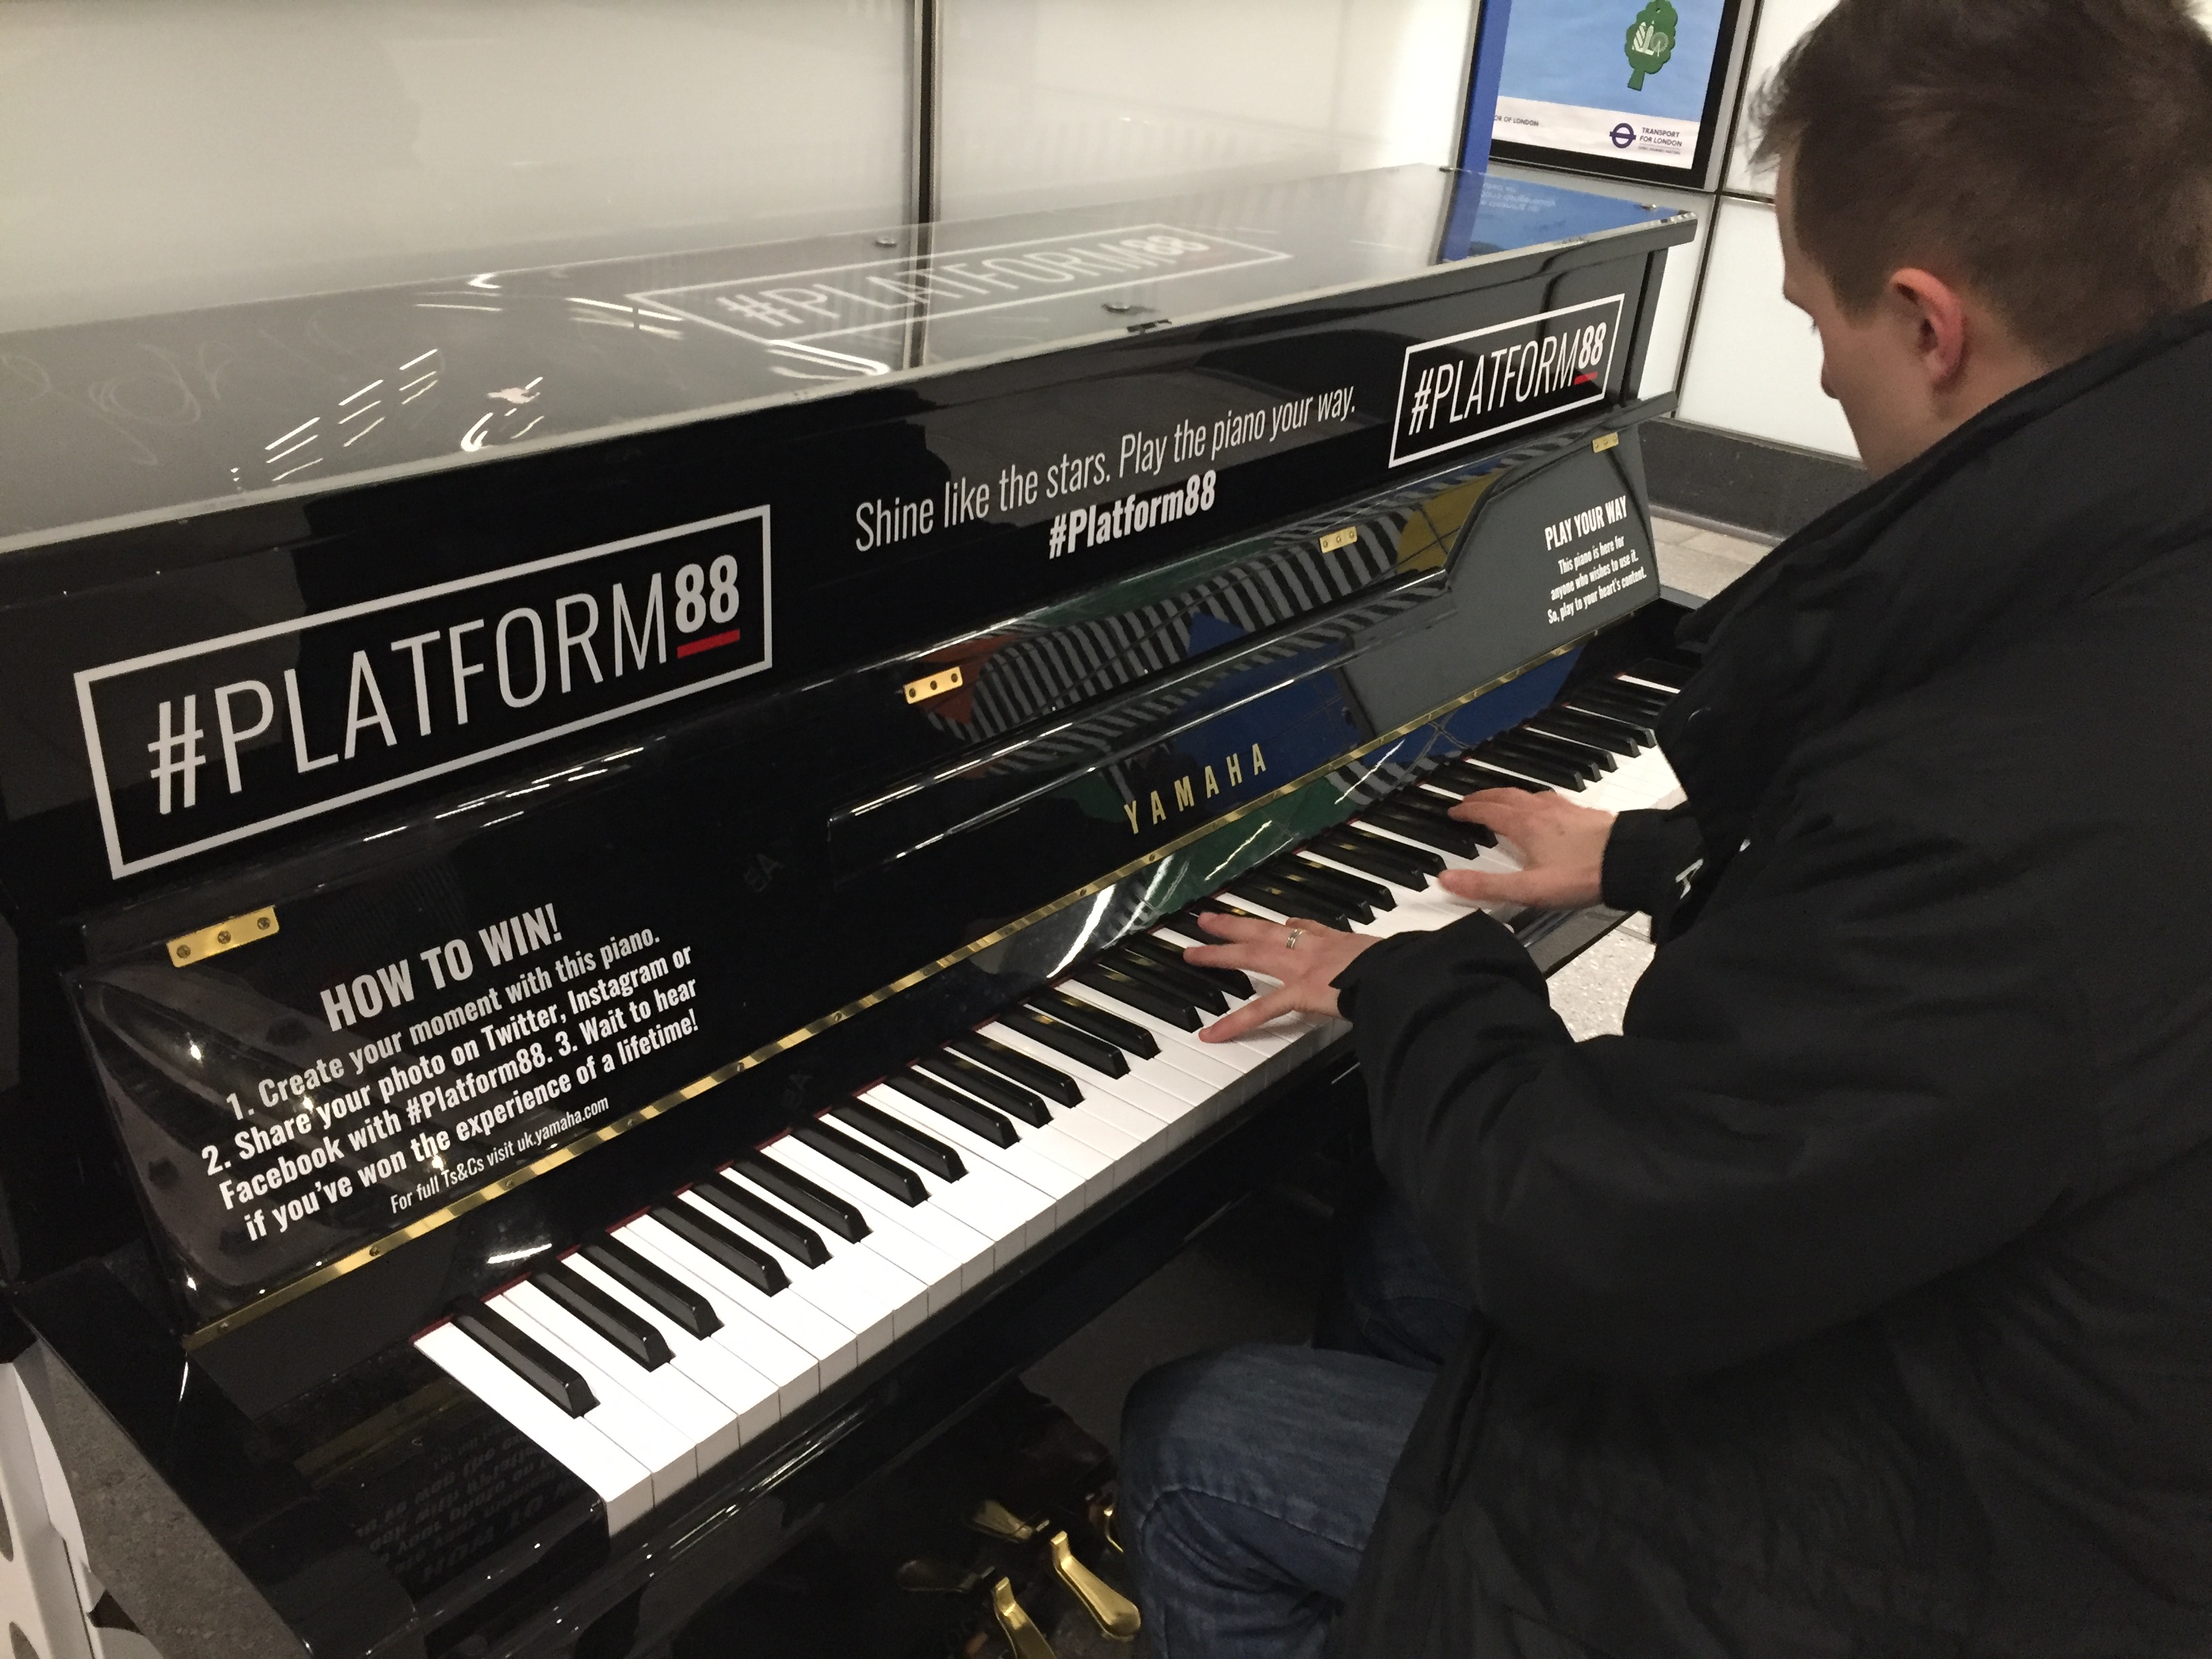 Amazing initiative by TFL & Yamaha - just go to the main concourse at Tottenham Court Road Tube & play your heart out 